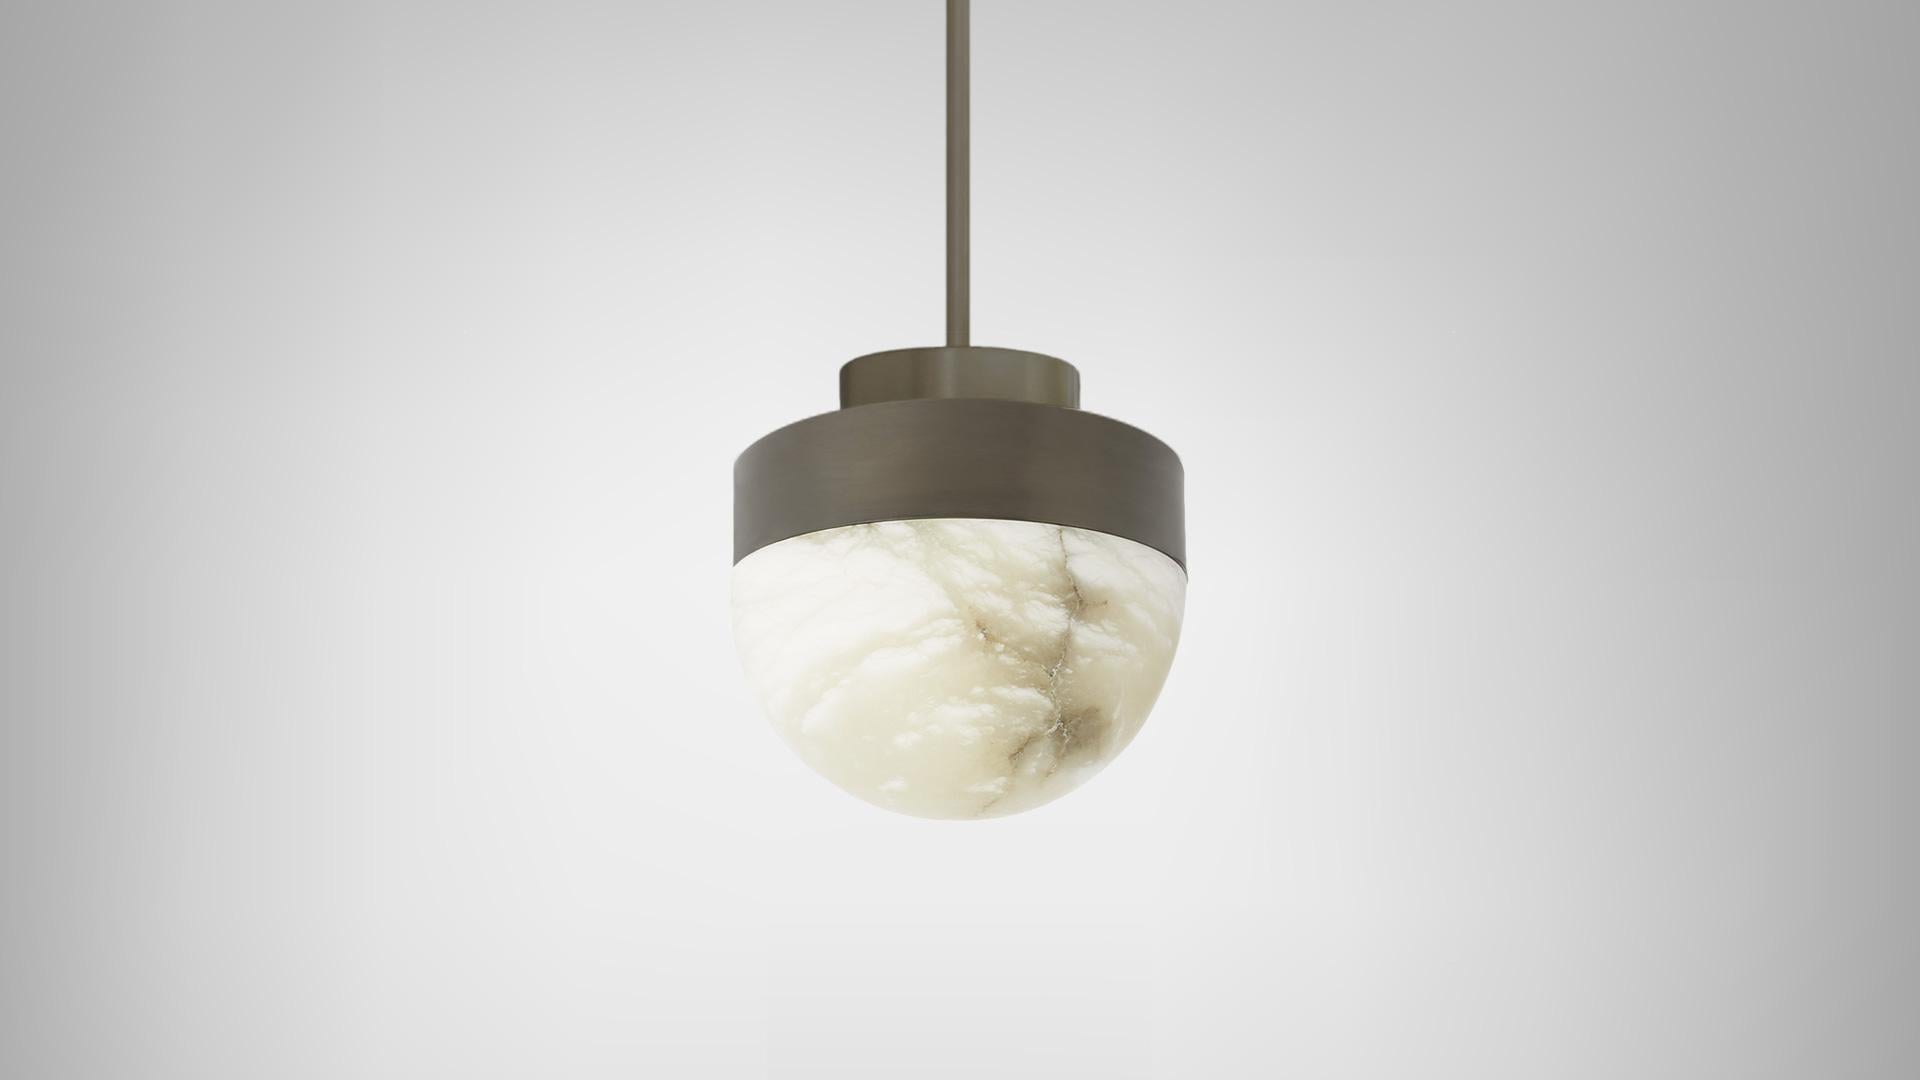 Lucid 200 pendant by CTO Lighting
Materials: honed alabaster with satin brass base.
Also available in honed alabaster with bronze base.
Dimensions: H 25 x W 20 cm

All our lamps can be wired according to each country. If sold to the USA it will